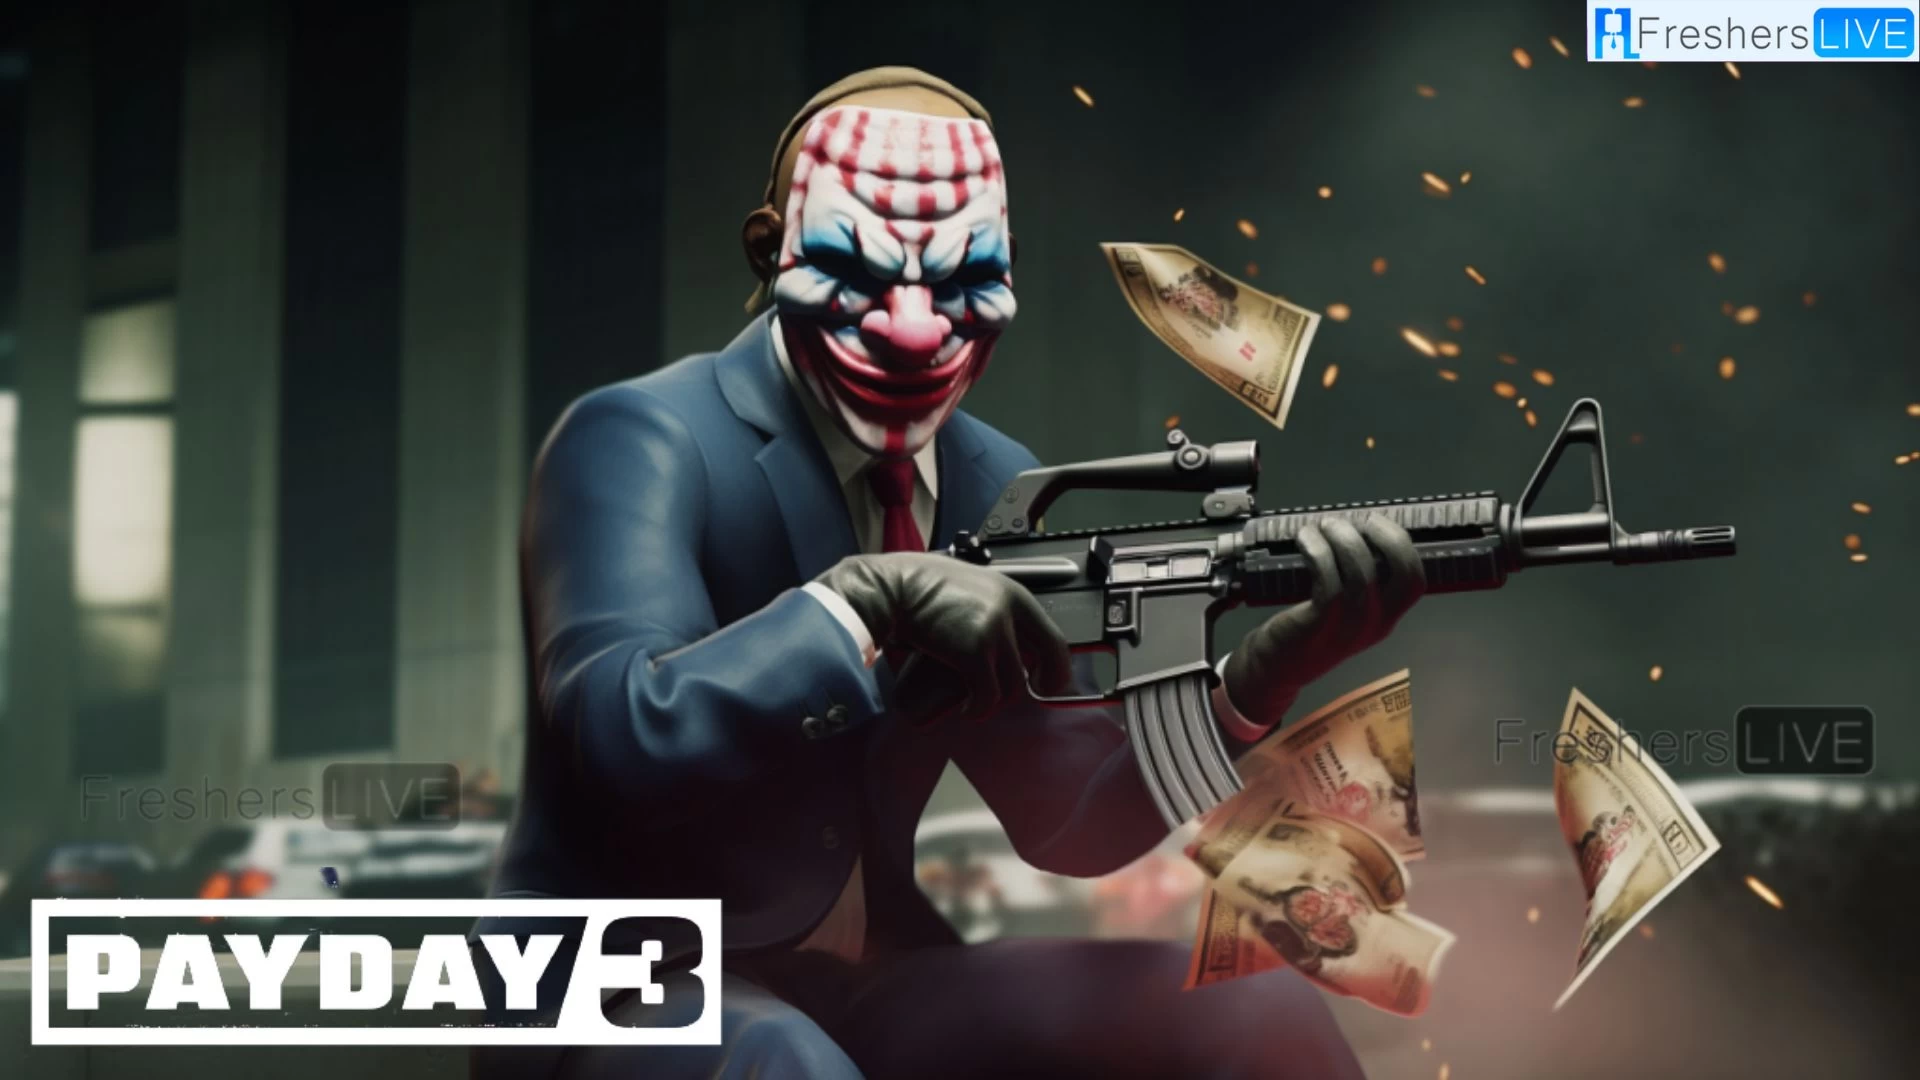 Do You Need 4 Players for Payday 3? How Many People Can Play Payday 3?